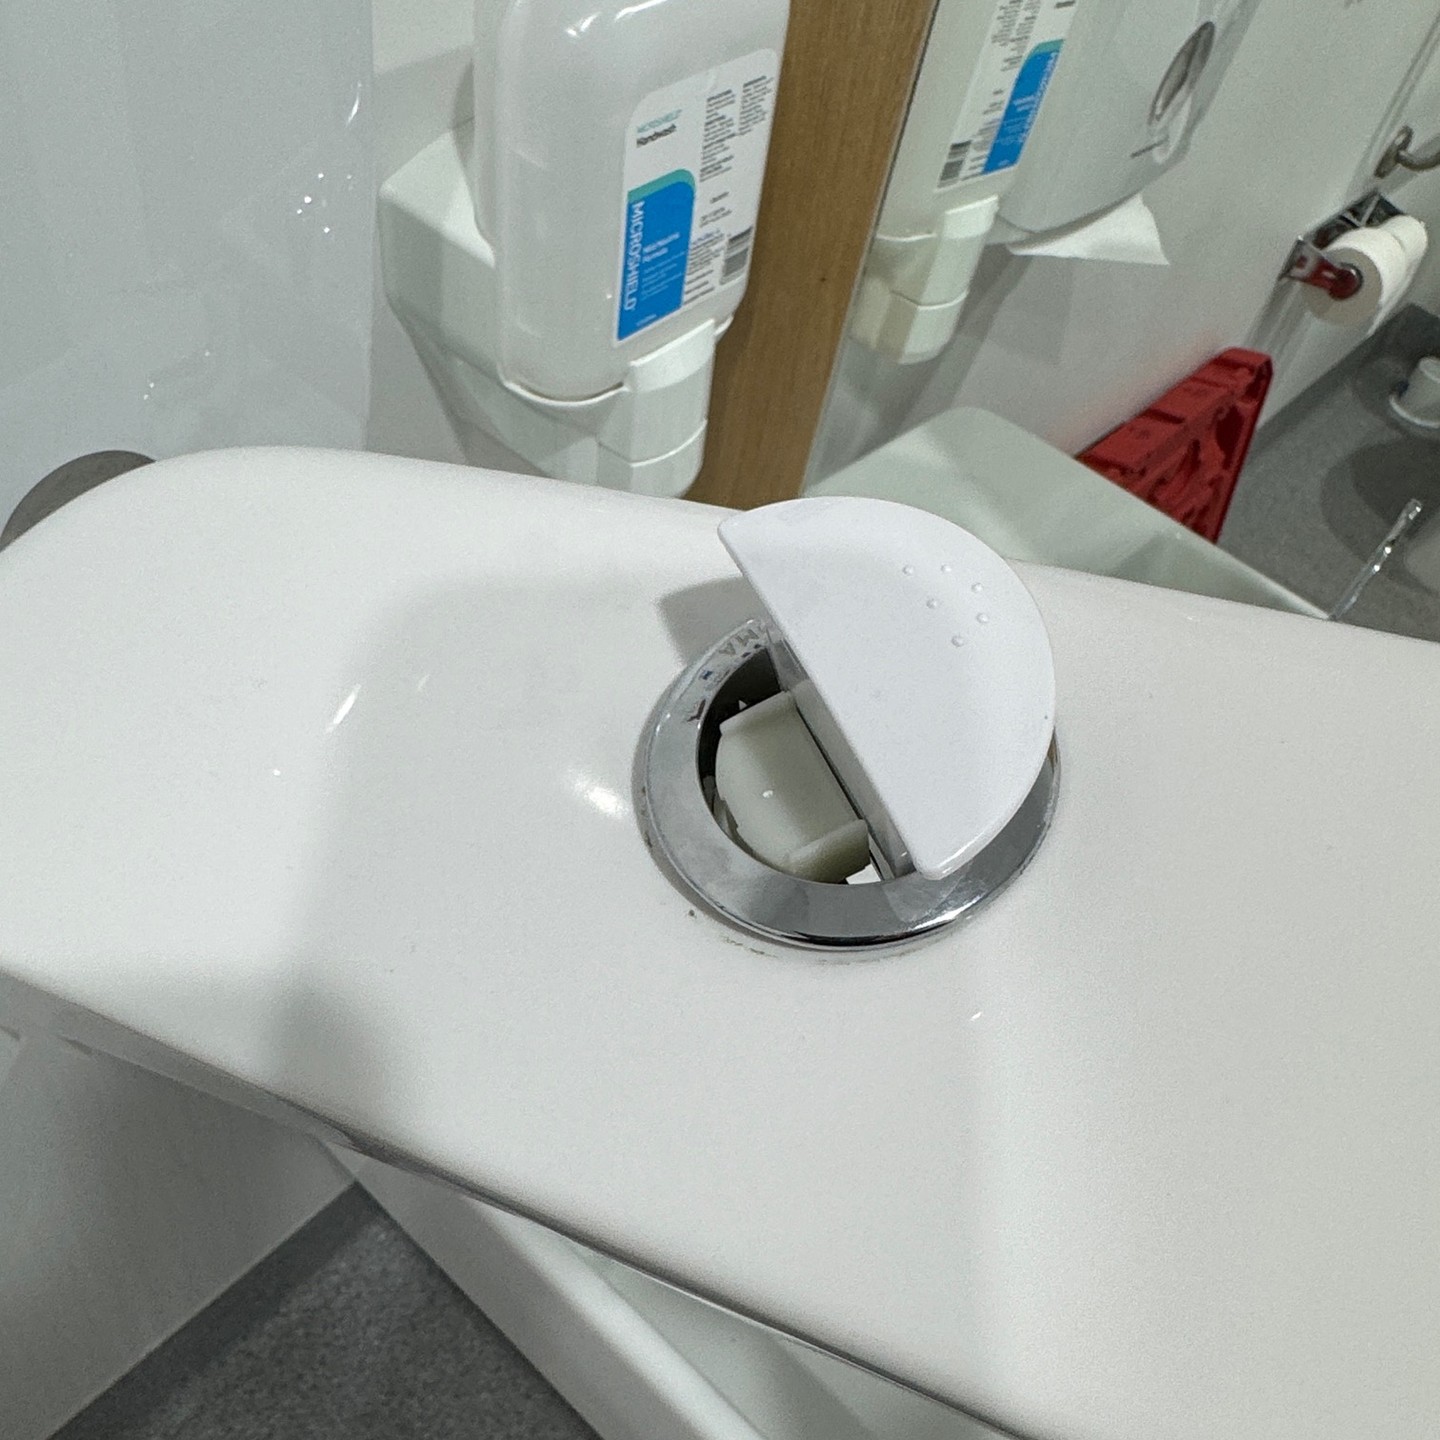 Our Most Recent Story of a Blocked Toilet